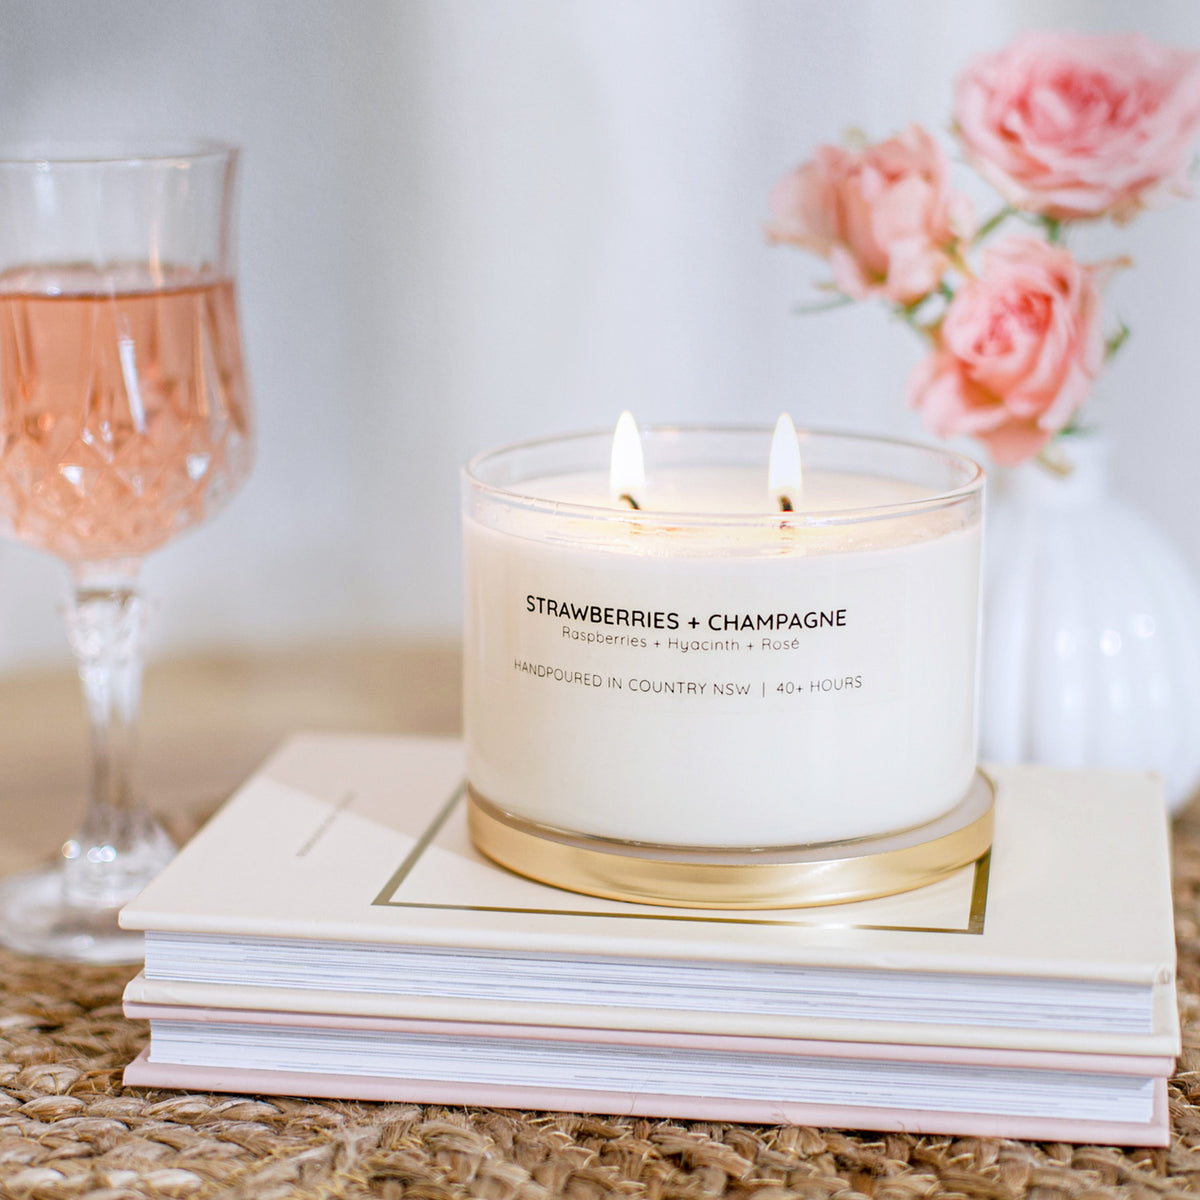 100% Natural Soy Wax "Strawberries & Champagne" Candle from Australia (330g)